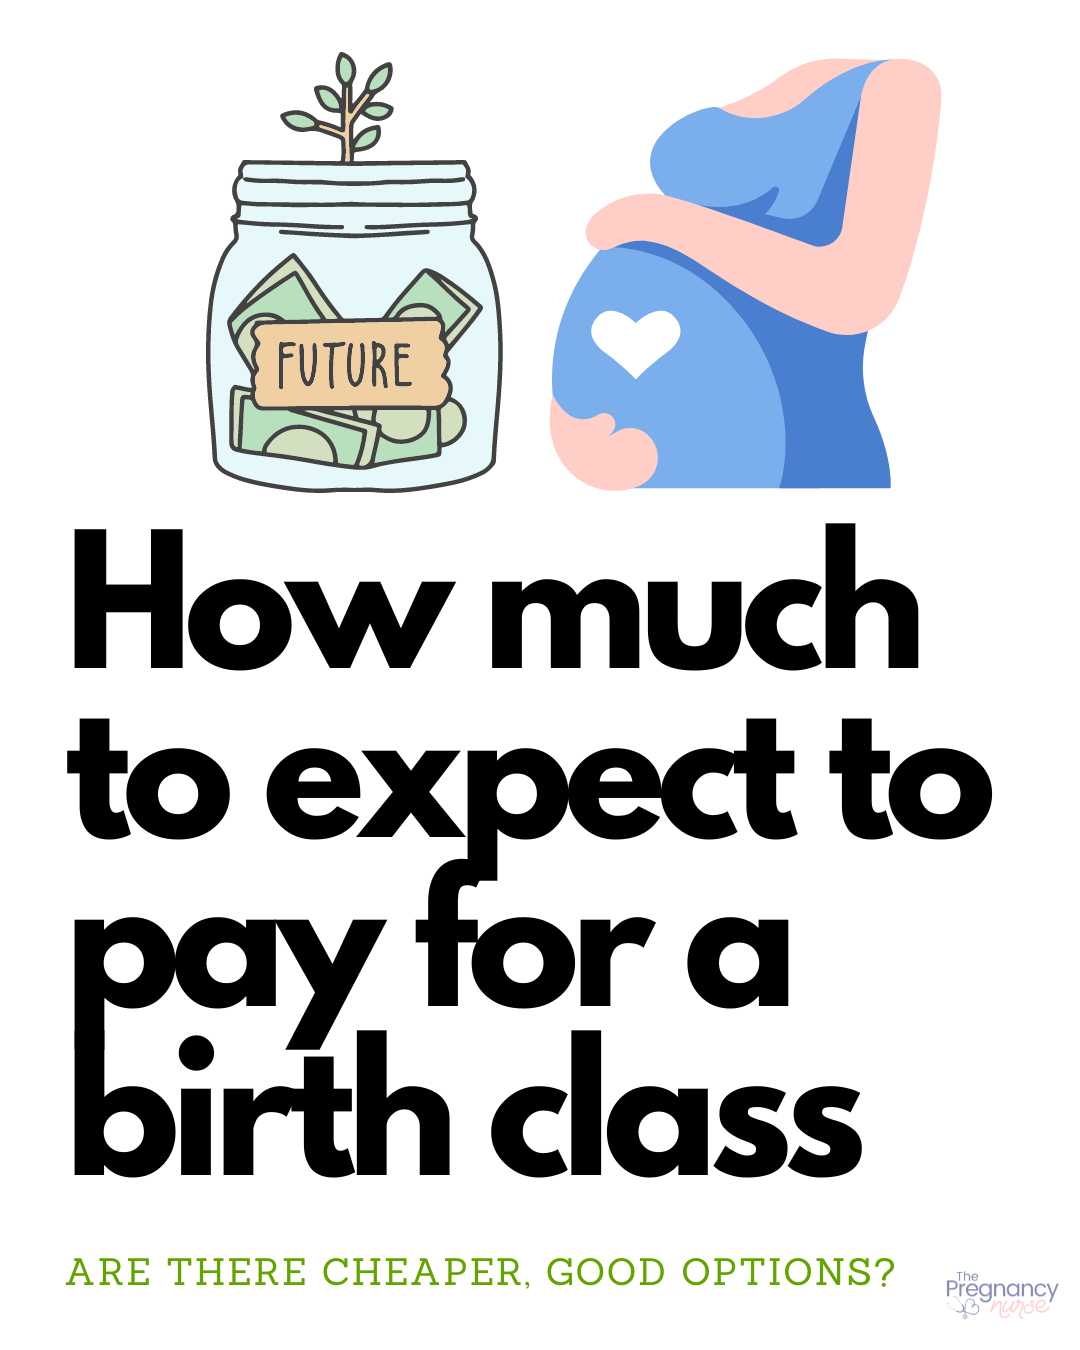 Are you pregnant and trying to figure out the best way to take birthing classes? Look no further! This post outlines the best (and cheapest) way to take birthing classes. Plus, we've got a few tips on how to make sure you're getting the most for your money.